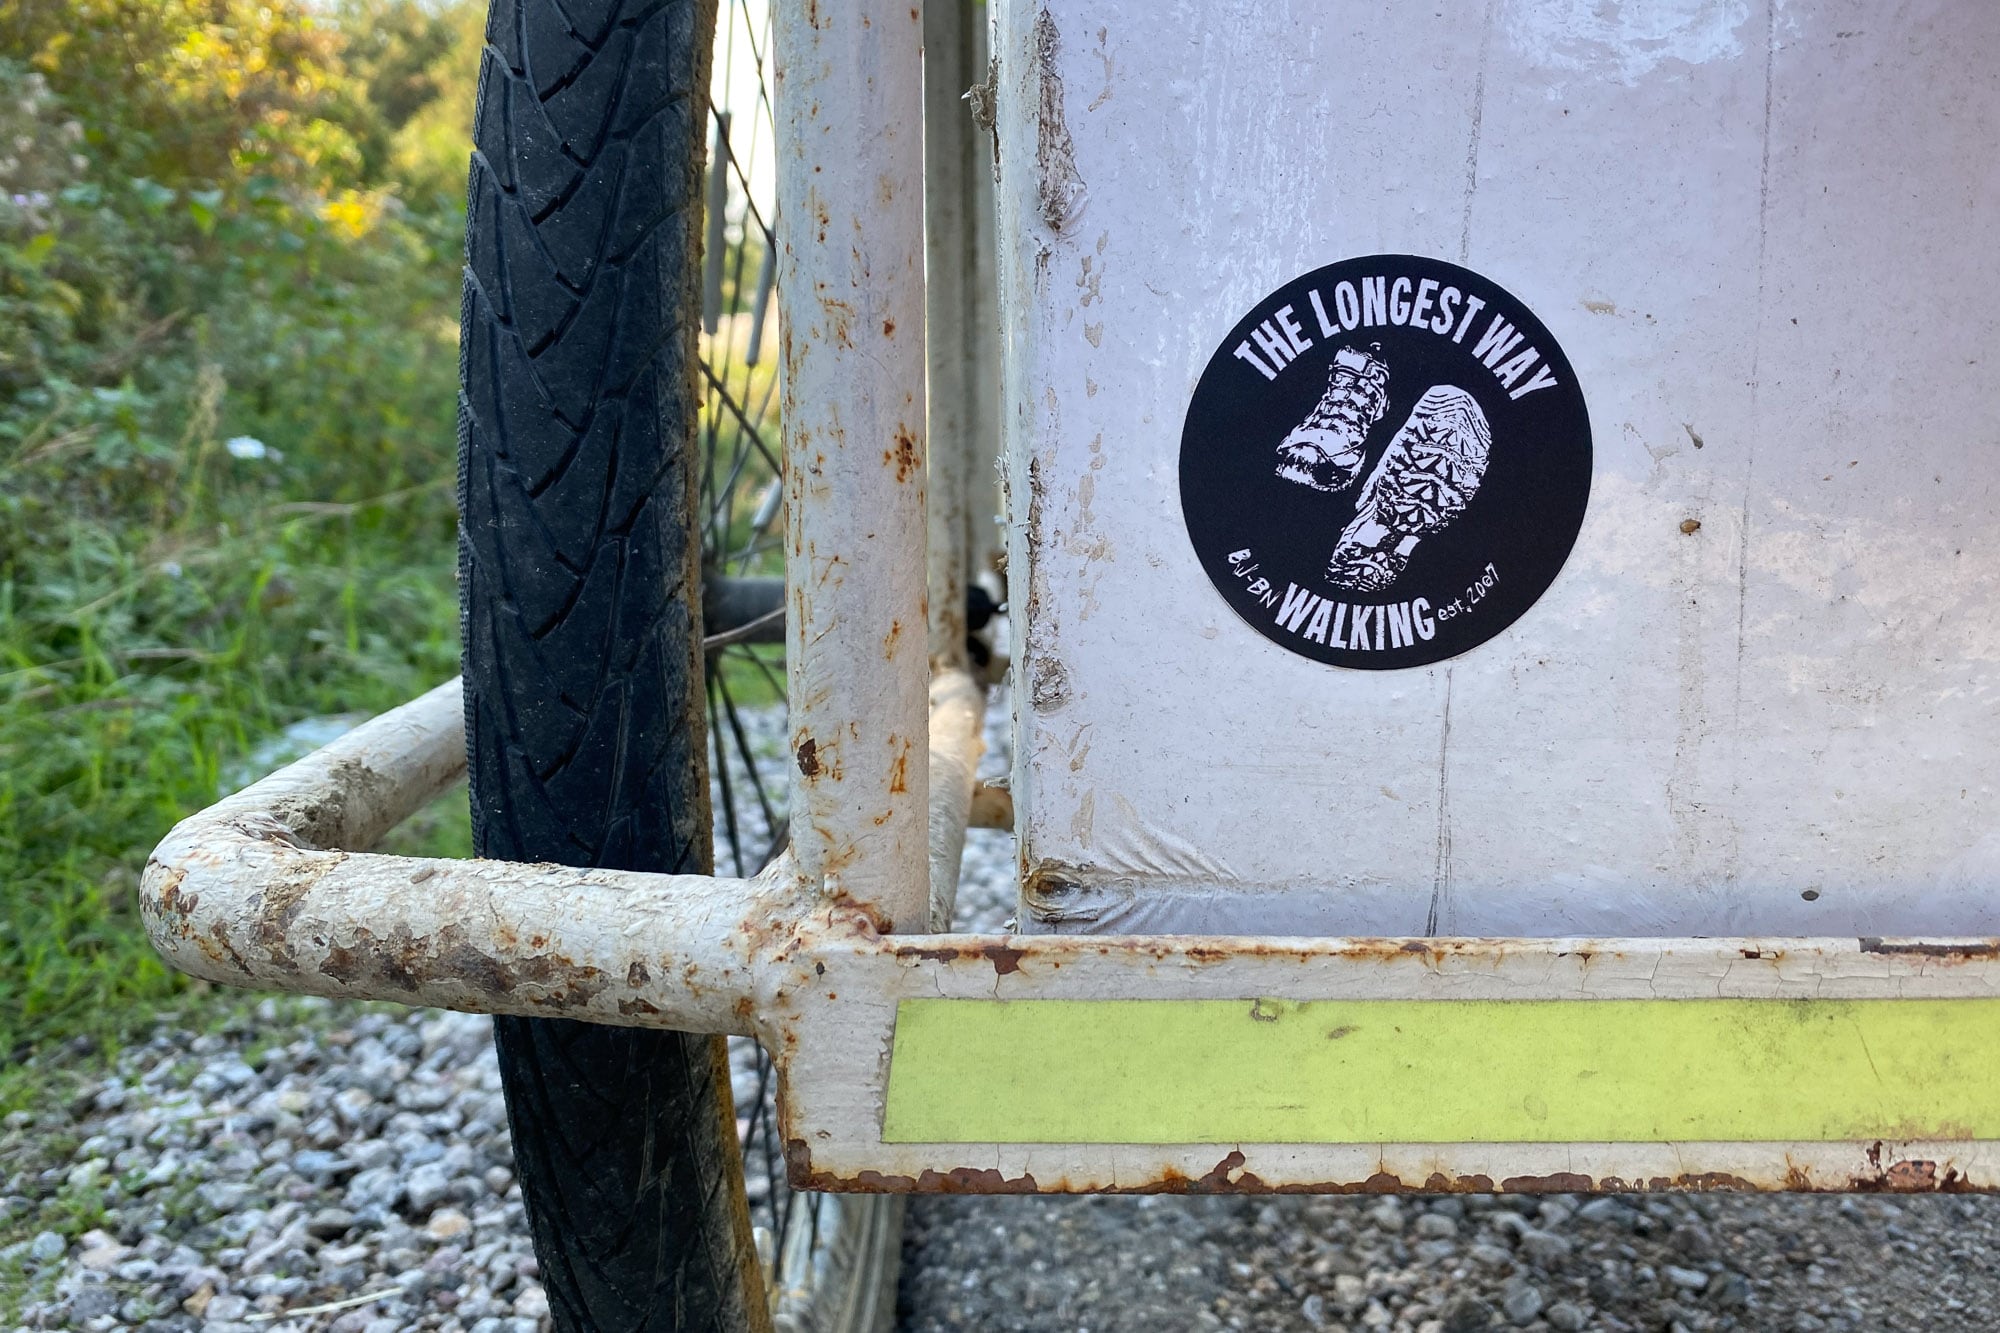 The Longest Way sticker on the Caboose